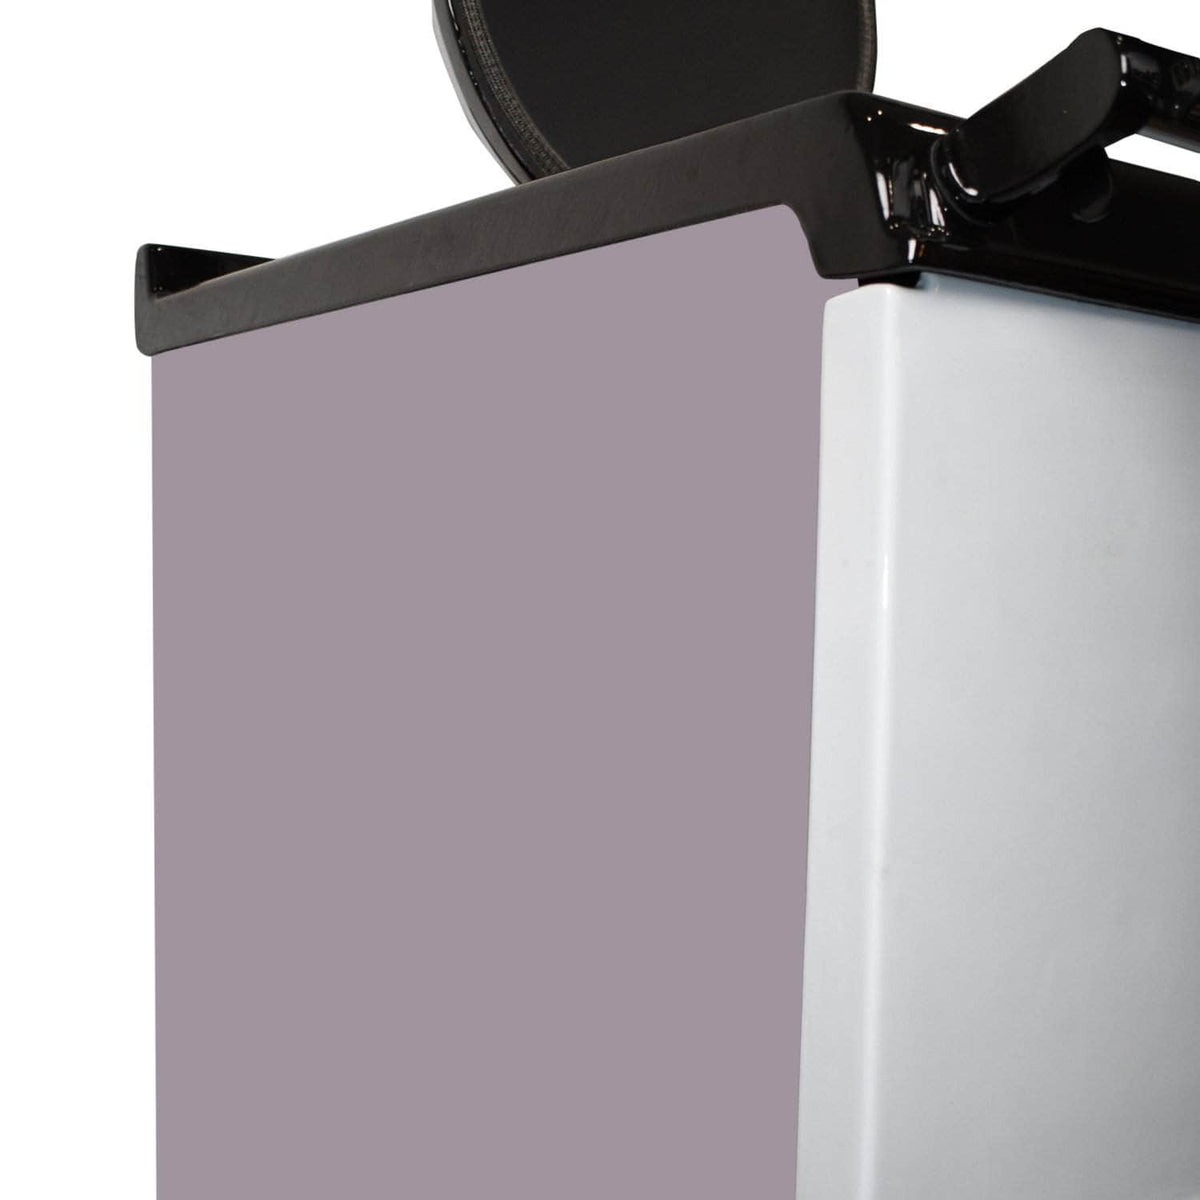 Side panels for use with &#39;Deluxe&#39; Aga range cookers Heather